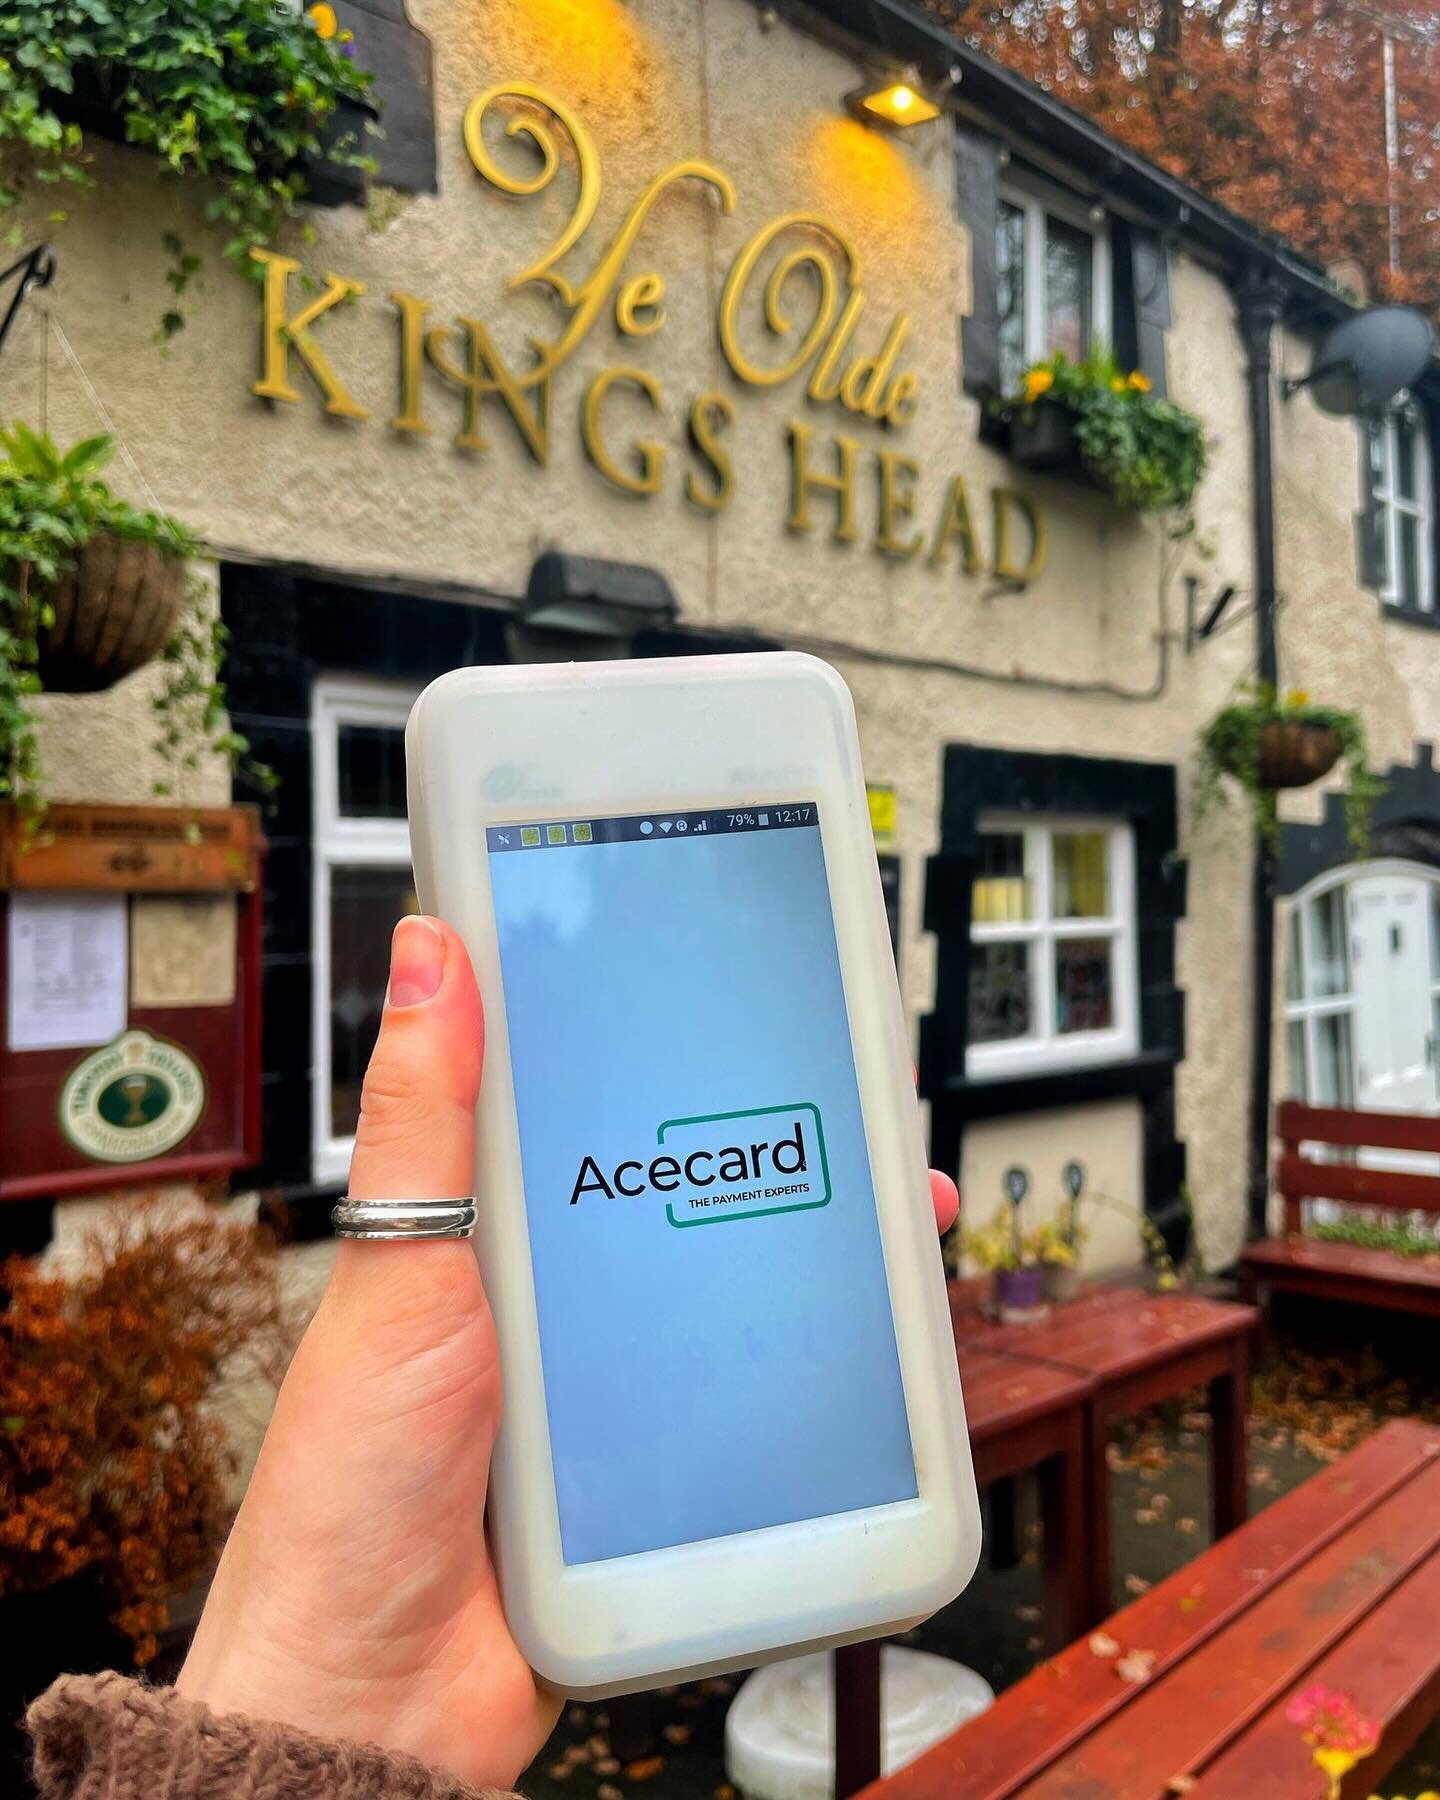 As we&rsquo;re approaching the festive period🎅 there&rsquo;s no better time to review your card payment services💰✂️

@yeoldekingsheadgurnett are one of our latest clients to take advantage of the amazing service we provide👇

✅ Latest technology te